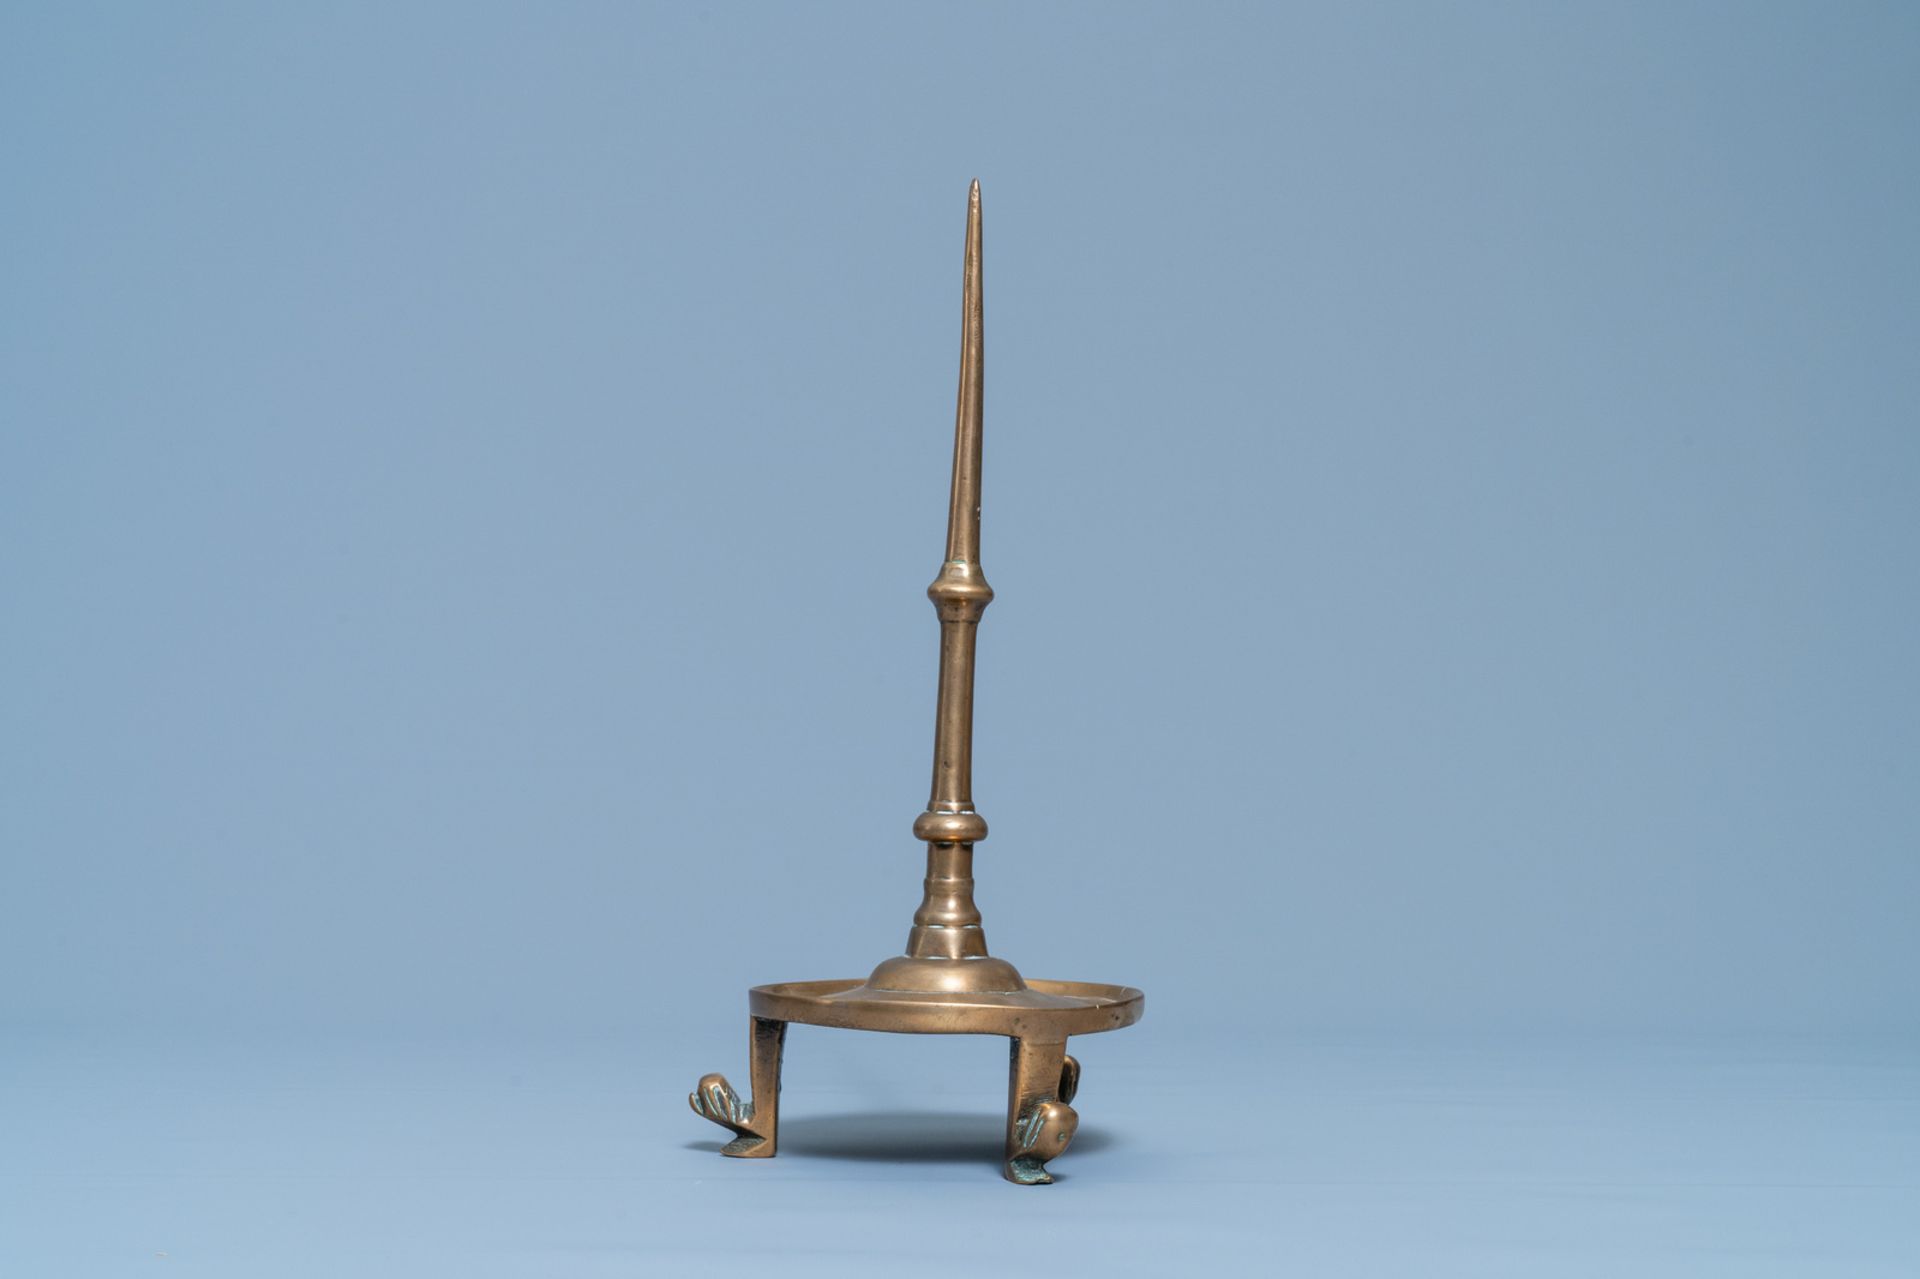 A Flemish or Dutch bronze candlestick, 14/15th C. - Image 5 of 7